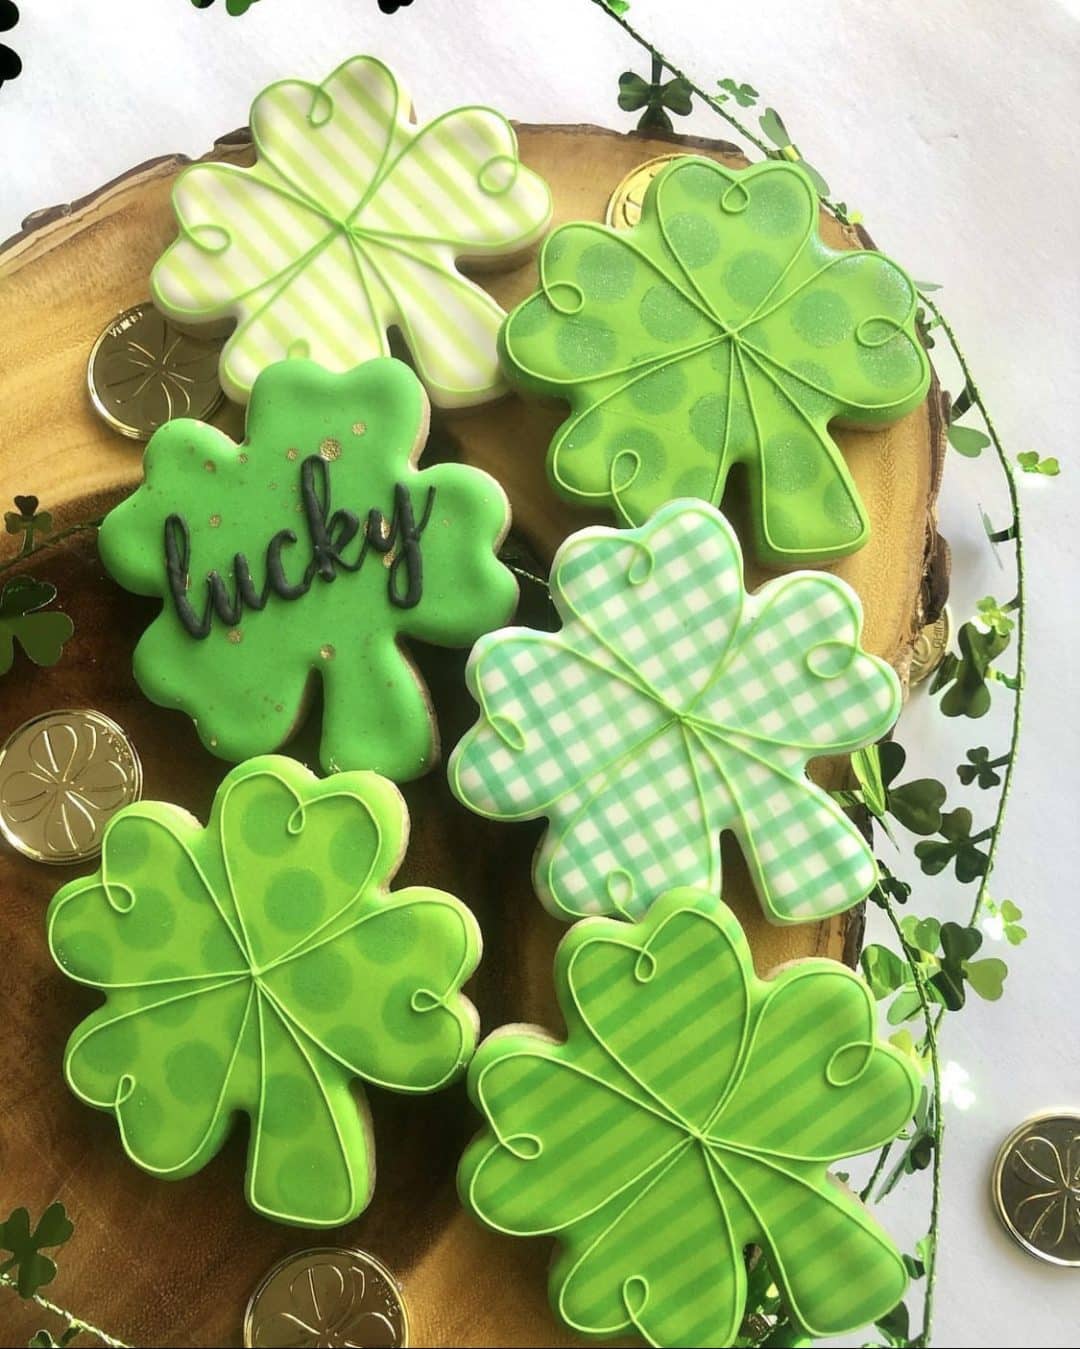 St. Patrick’s Day Cookies